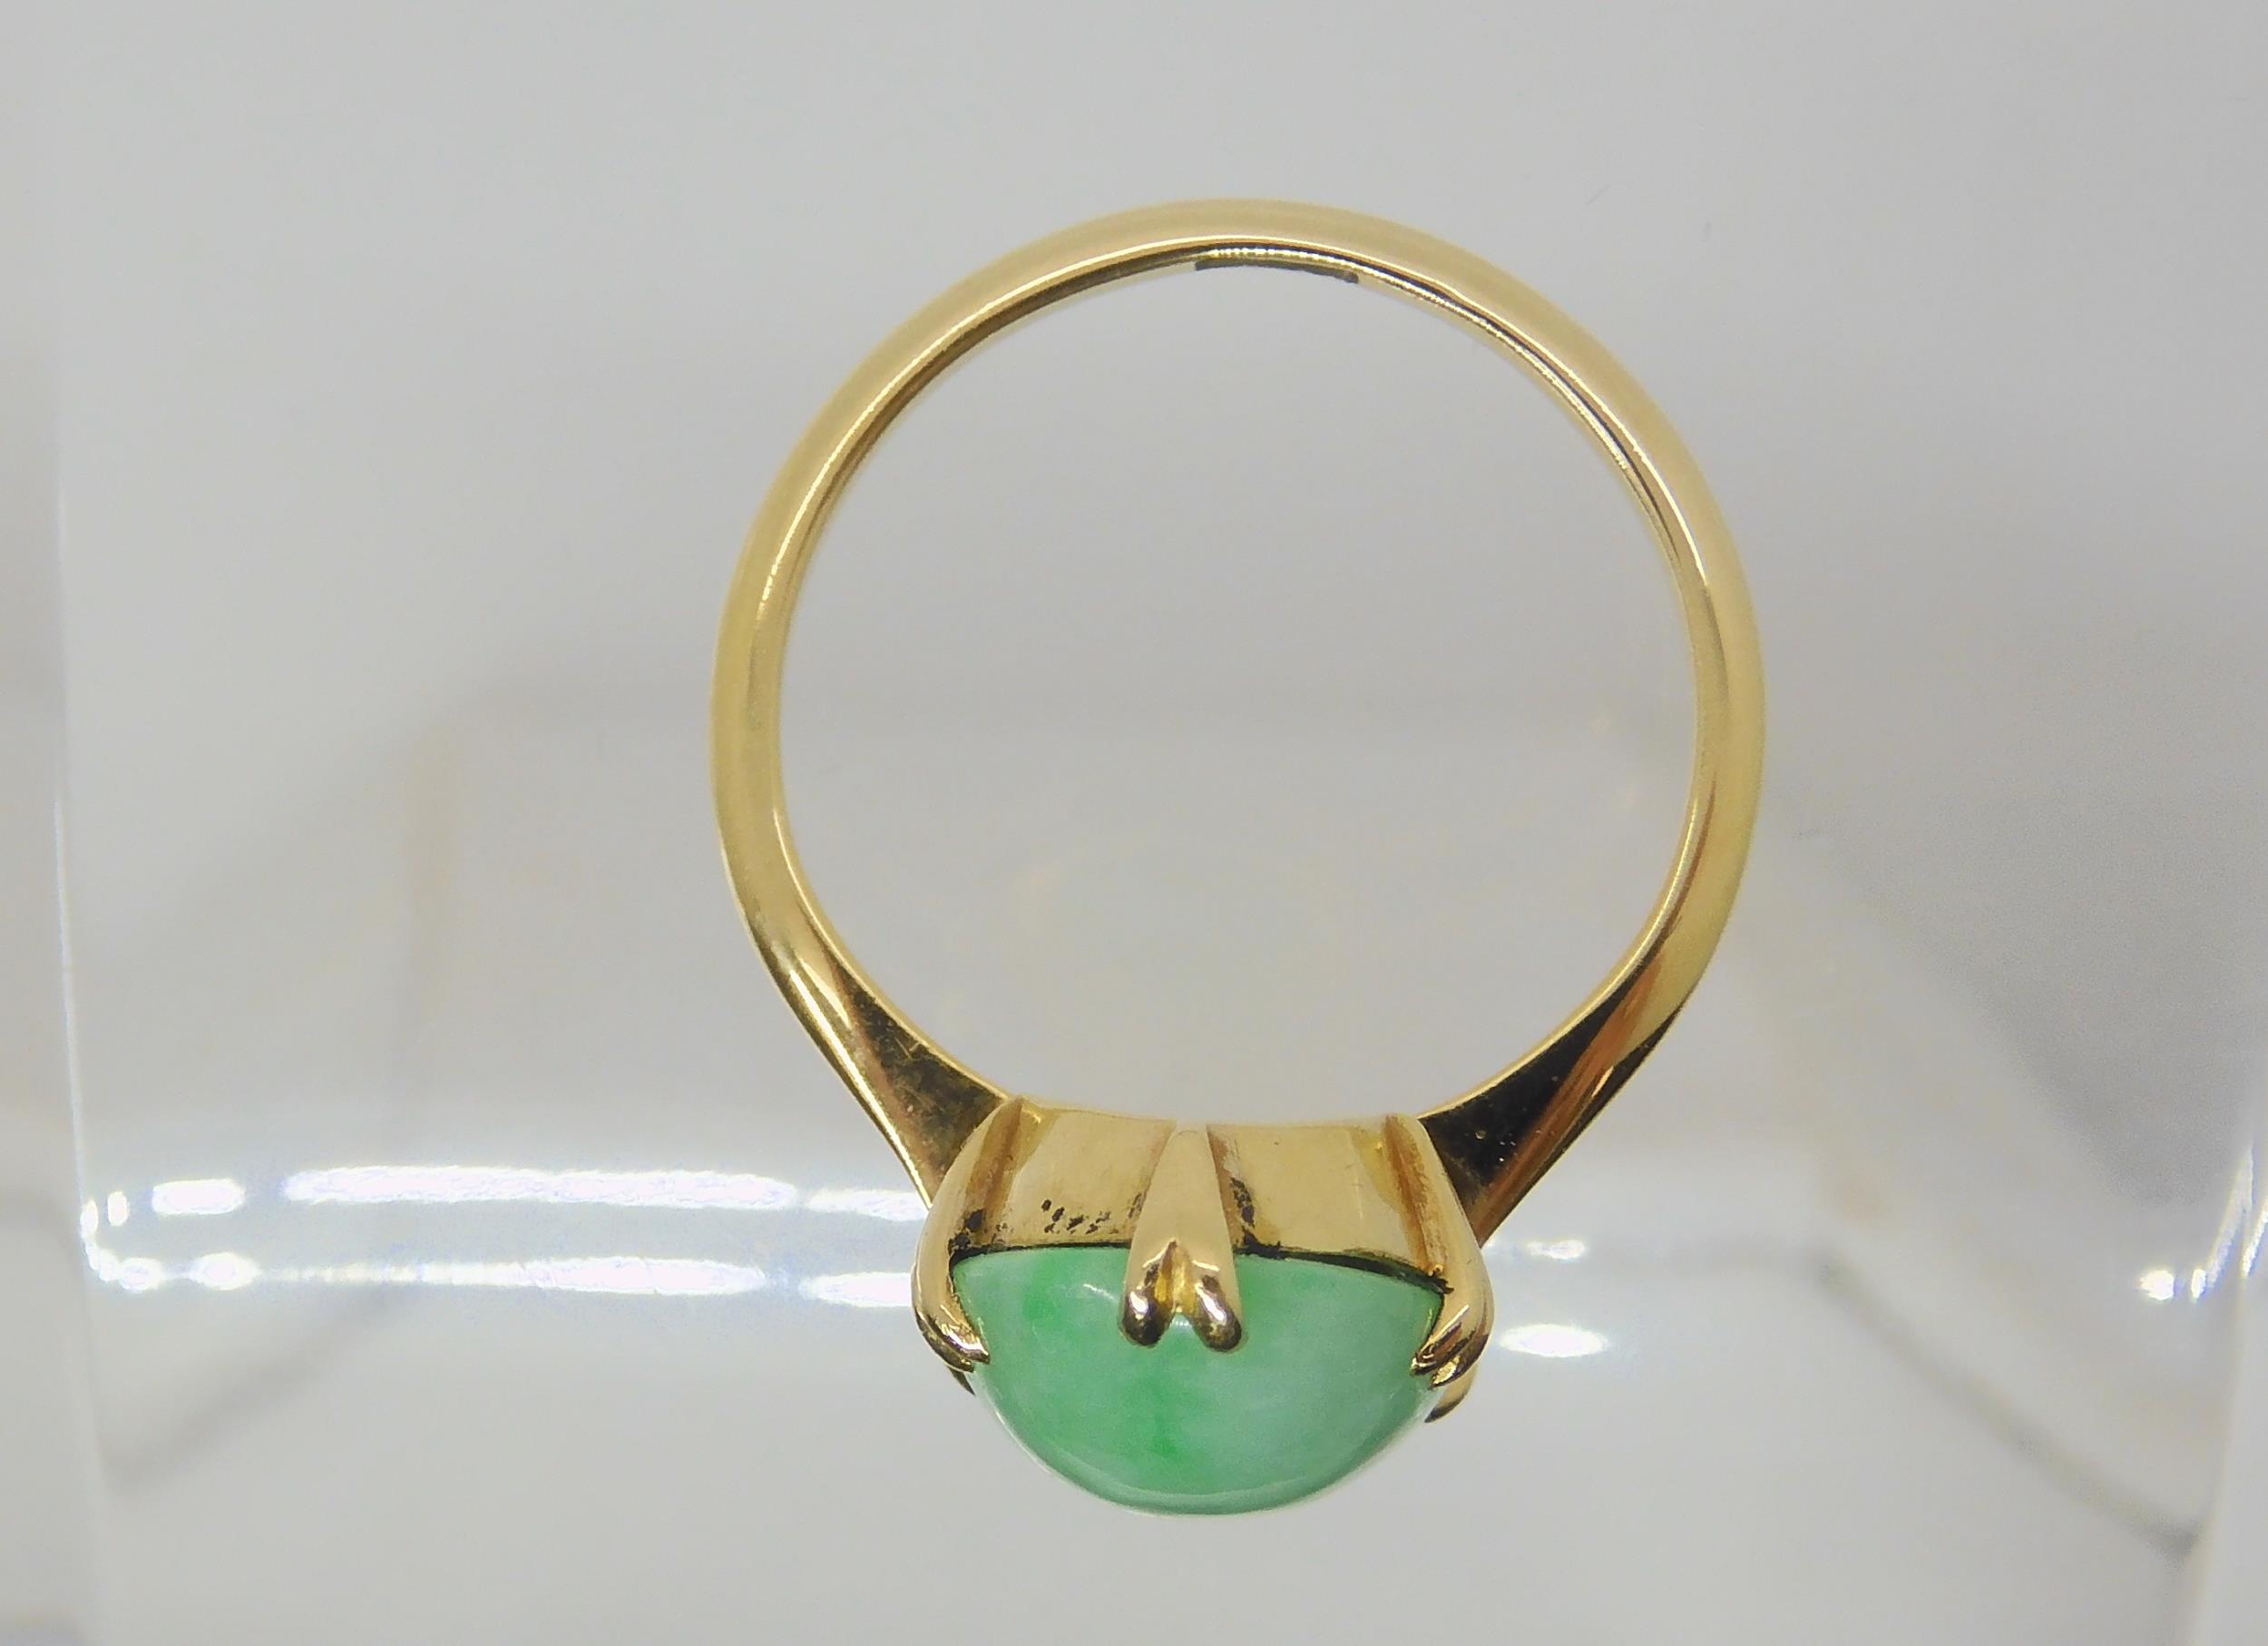 A CHINESE GREEN HARDSTONE RING mounted in bright yellow metal, the hardstone measures approx 16mm - Image 3 of 4